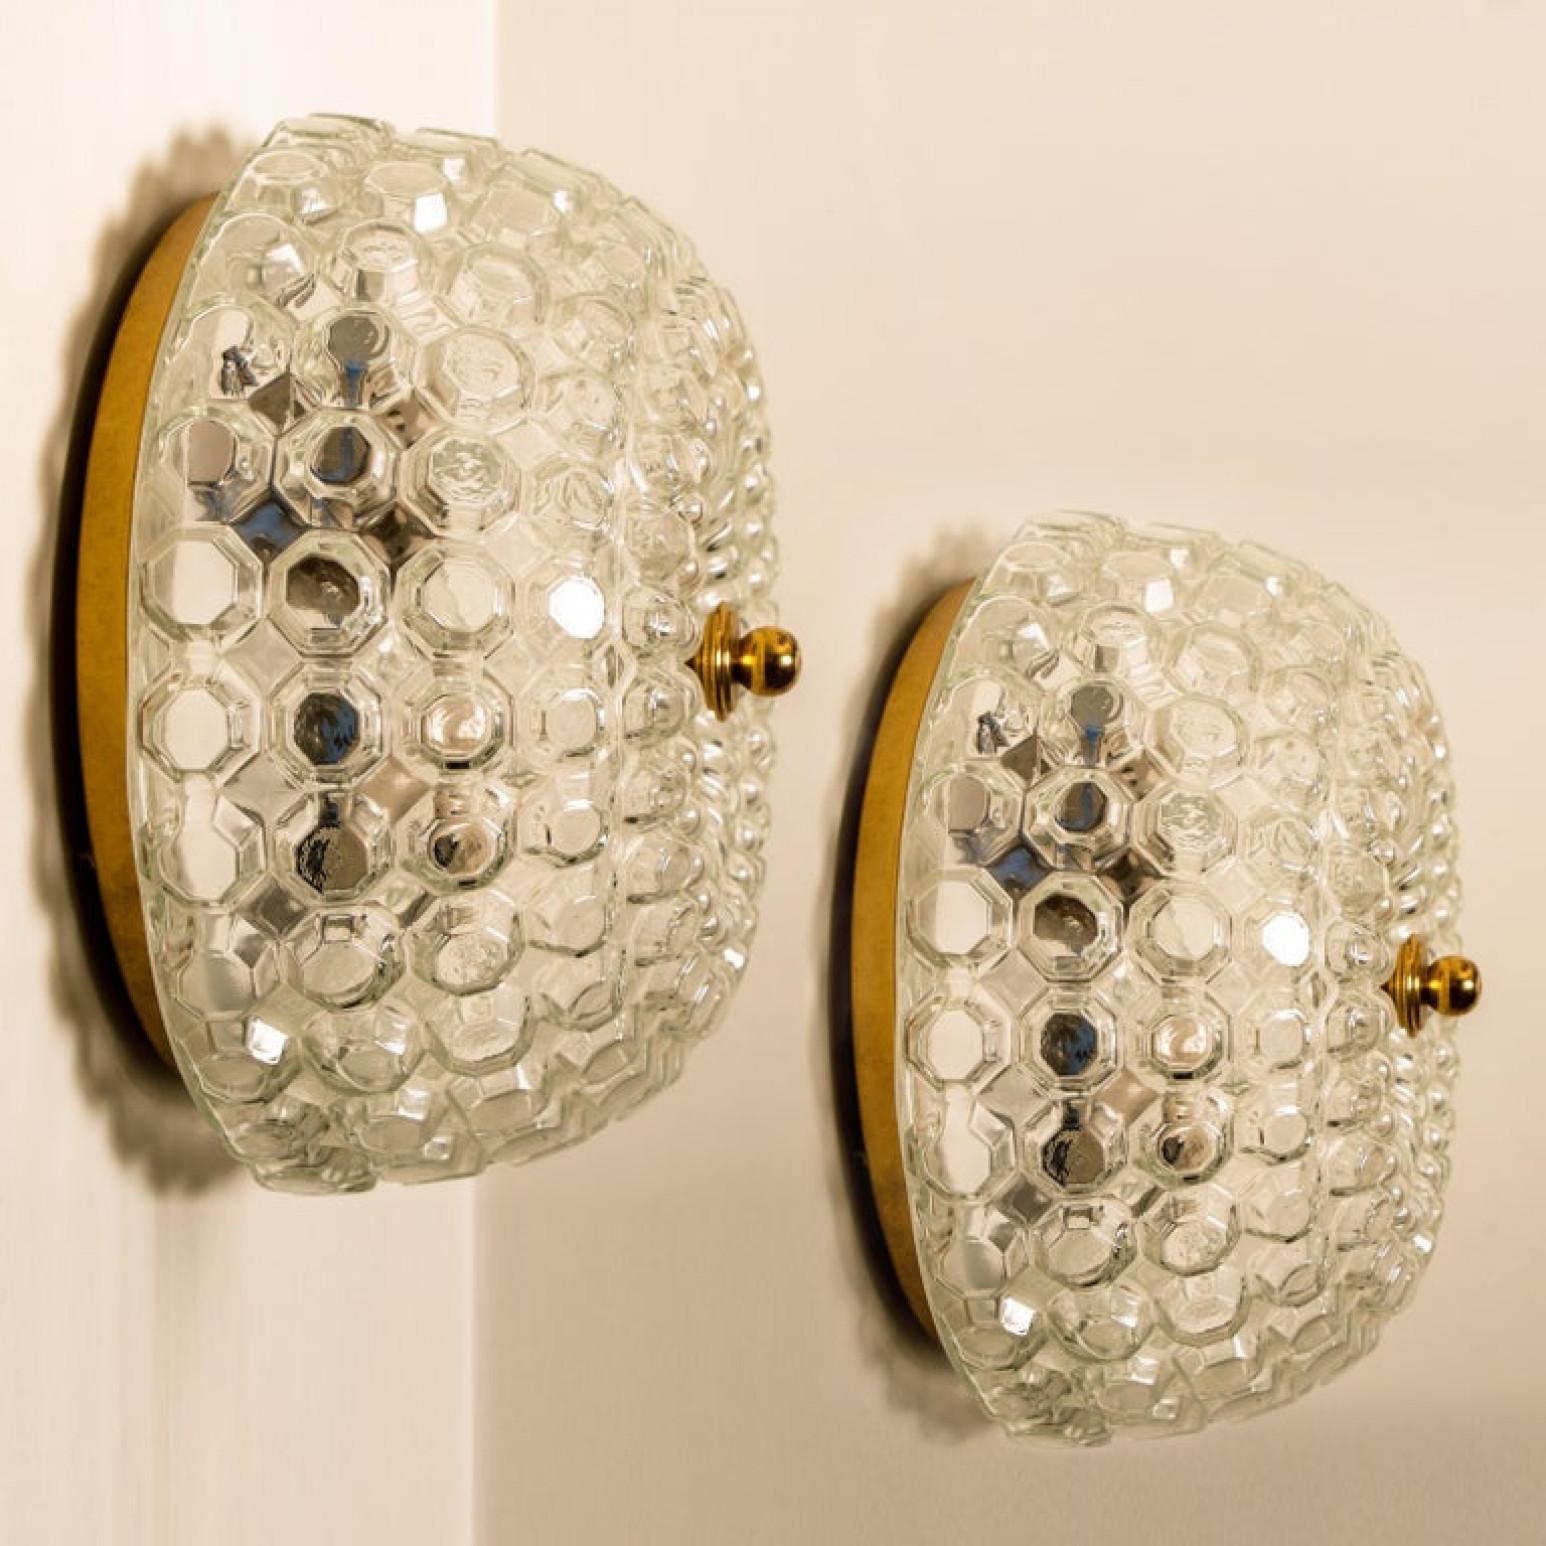 Pair of  beautiful high-end large bubble flush mounts Helana Tynell for Limburg Glashütte, Germany, 1960s.
Made of glossy clear colored glass with a brass colored details and a white back plate. Illuminates beautifully.

Can work as impressive wall